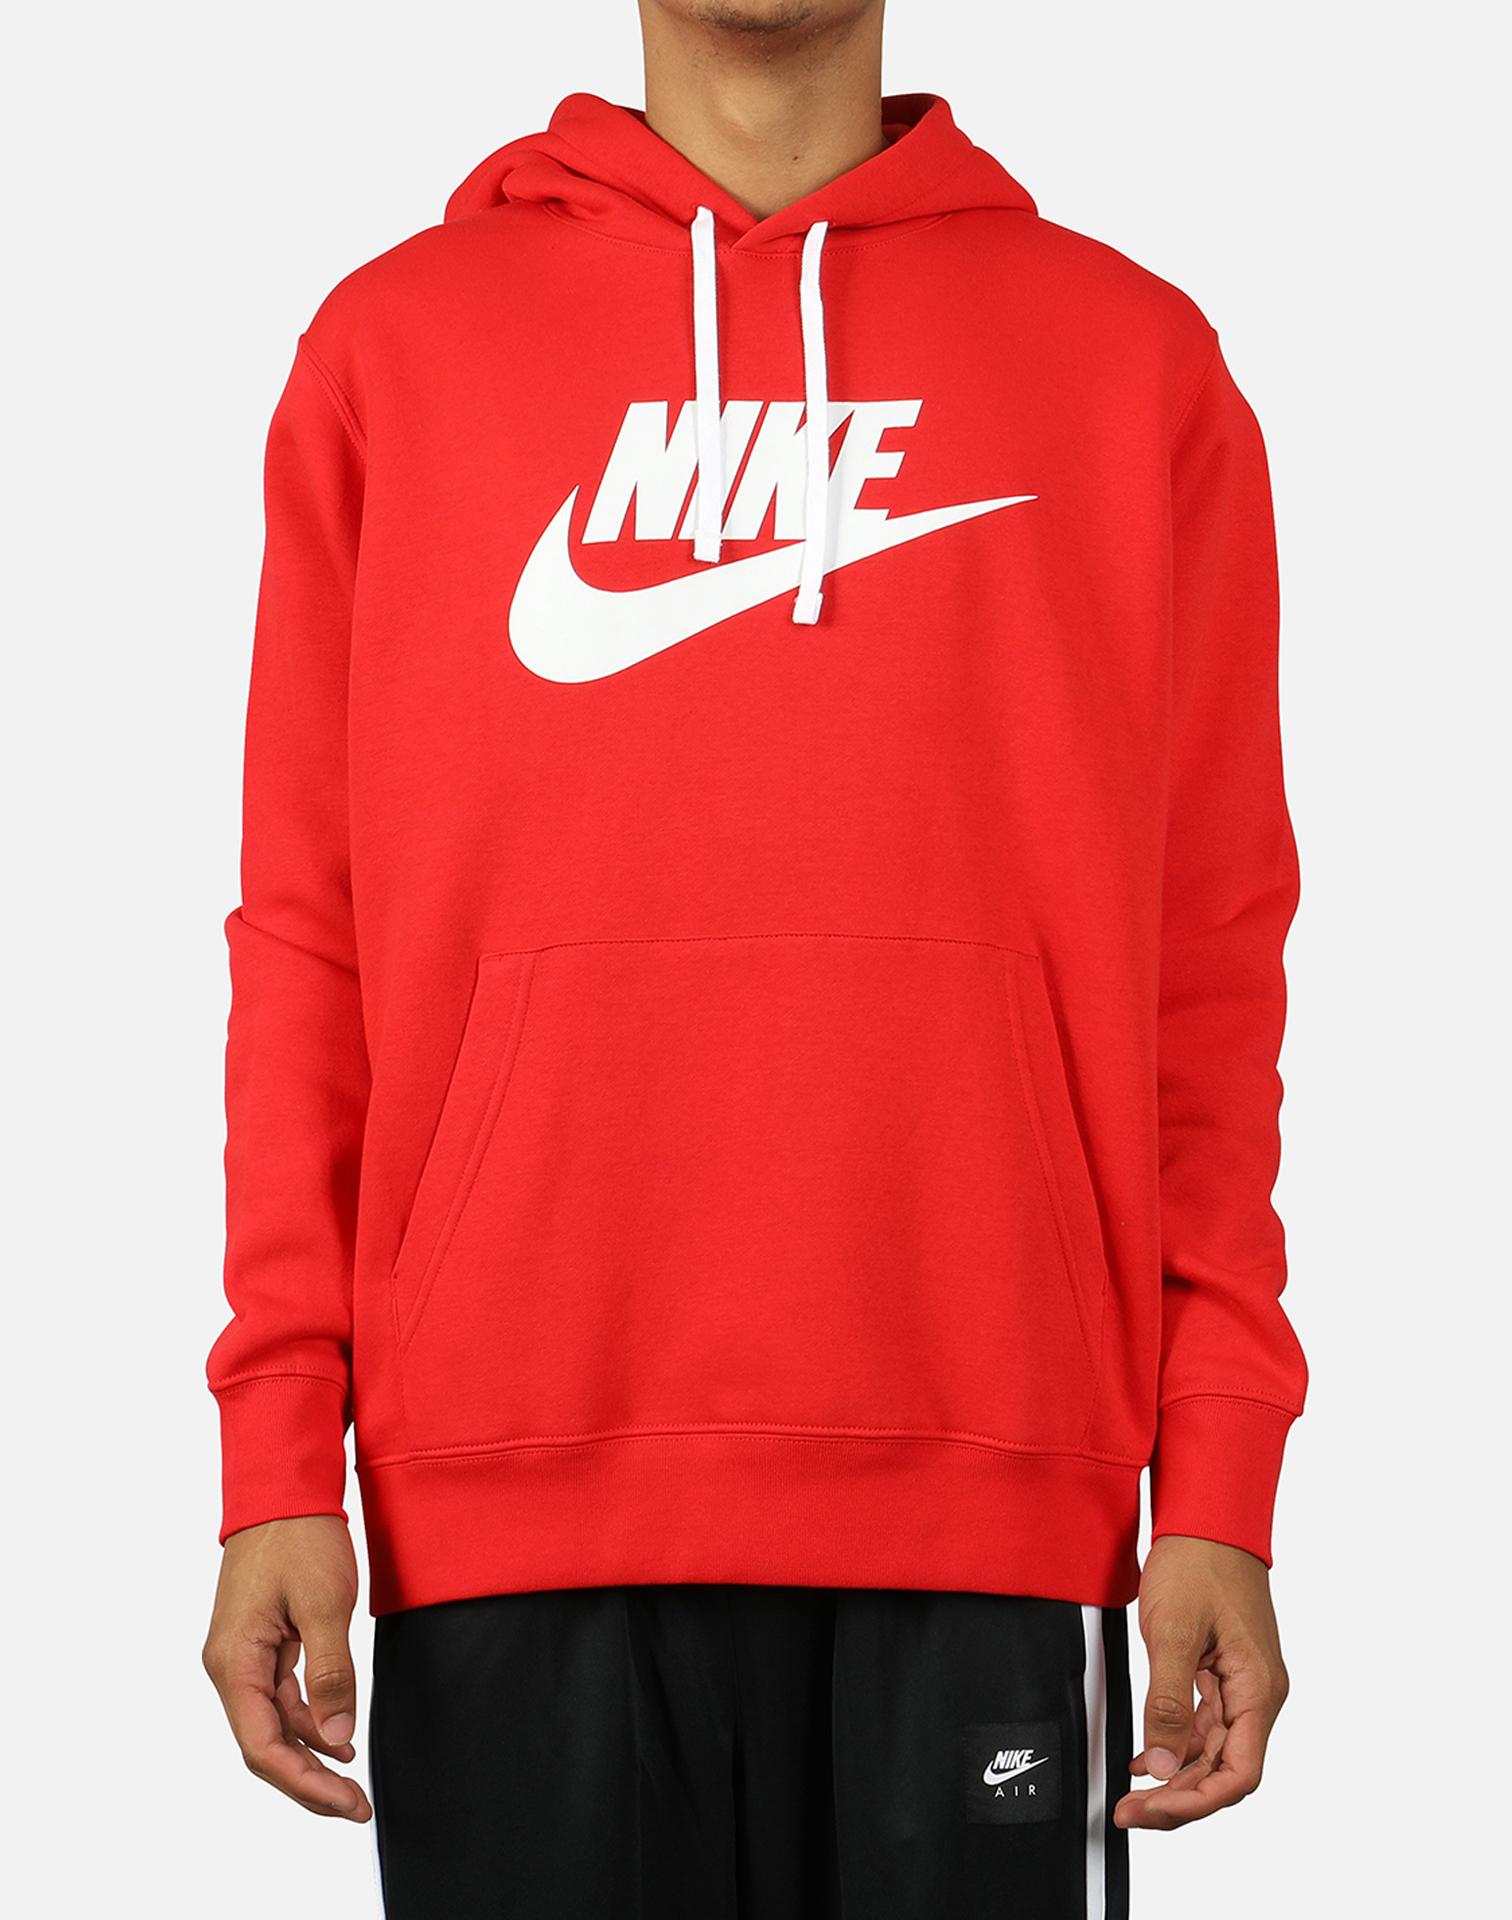 Nike Nsw Club Fleece Pullover Hoodie in Red for Men - Lyst